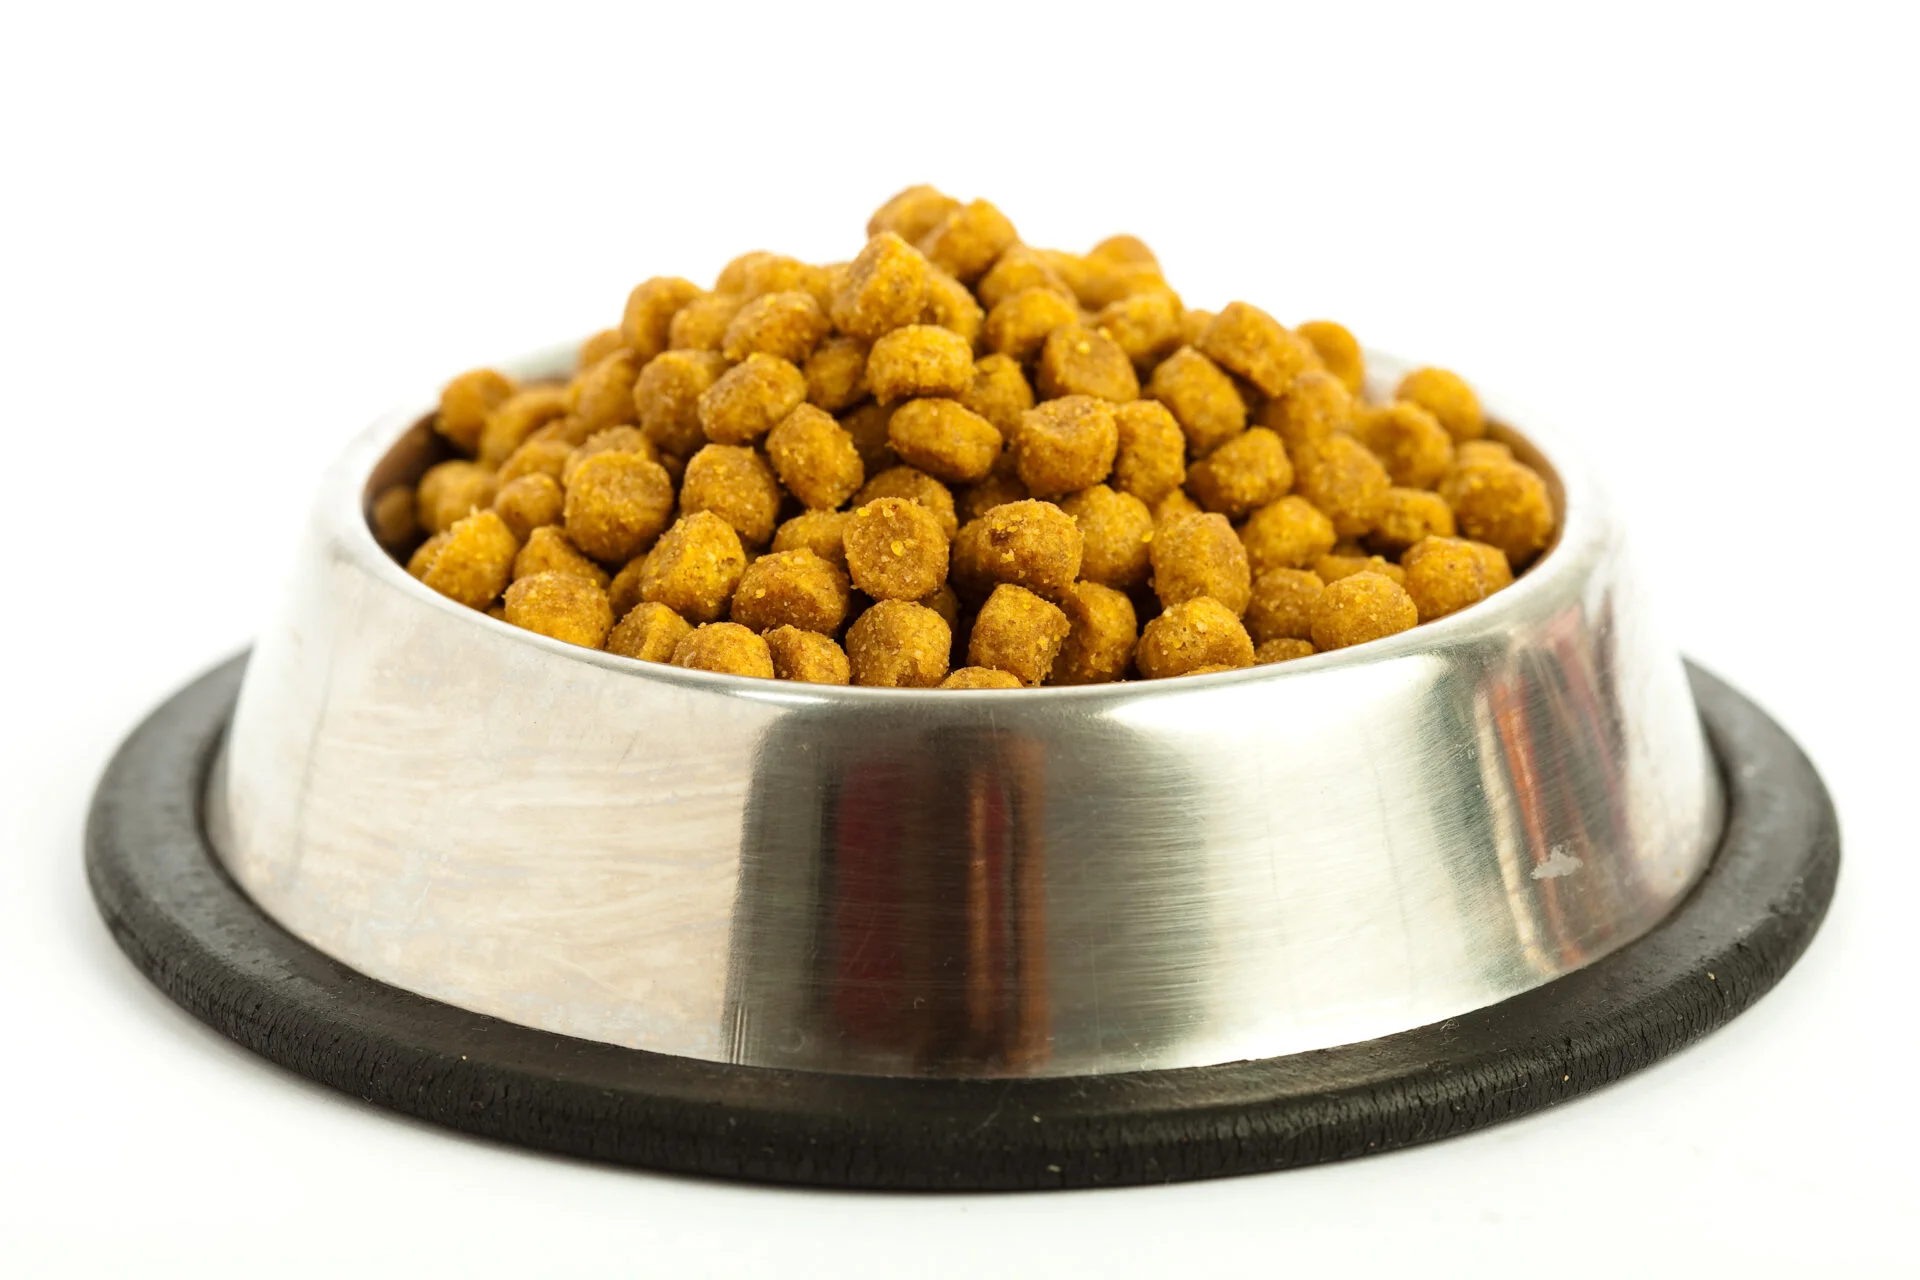 dogfood in a stainless steel dog bowl